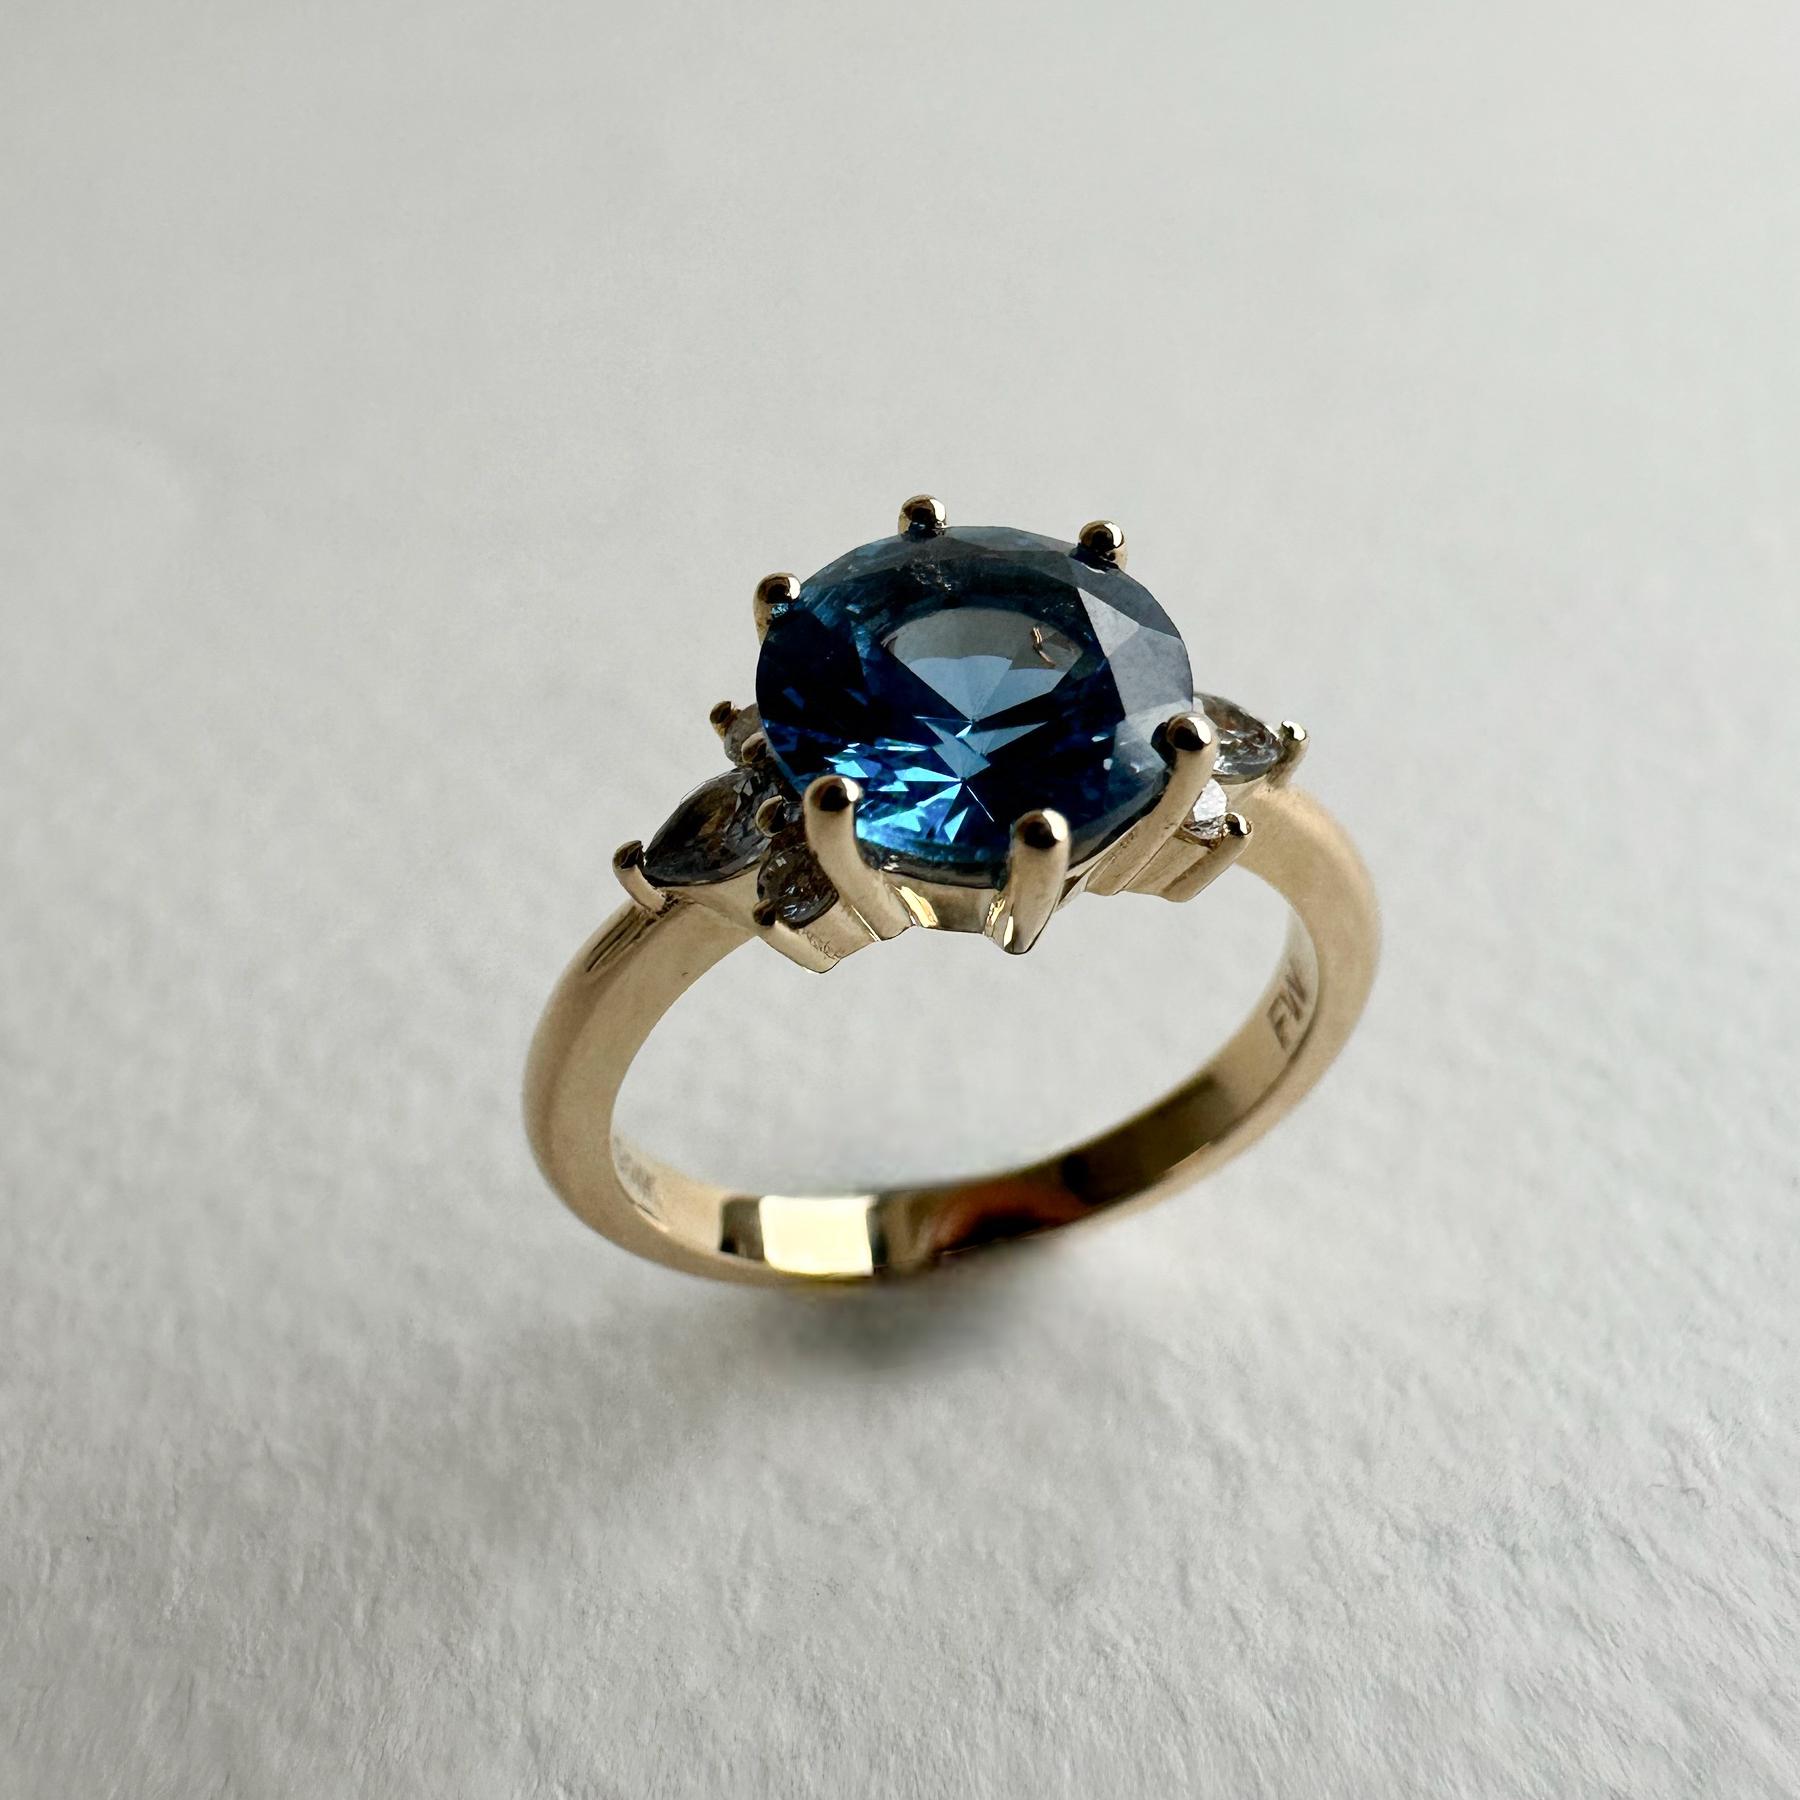 2 carat round sapphire in 14K yellow gold with accenting diamonds